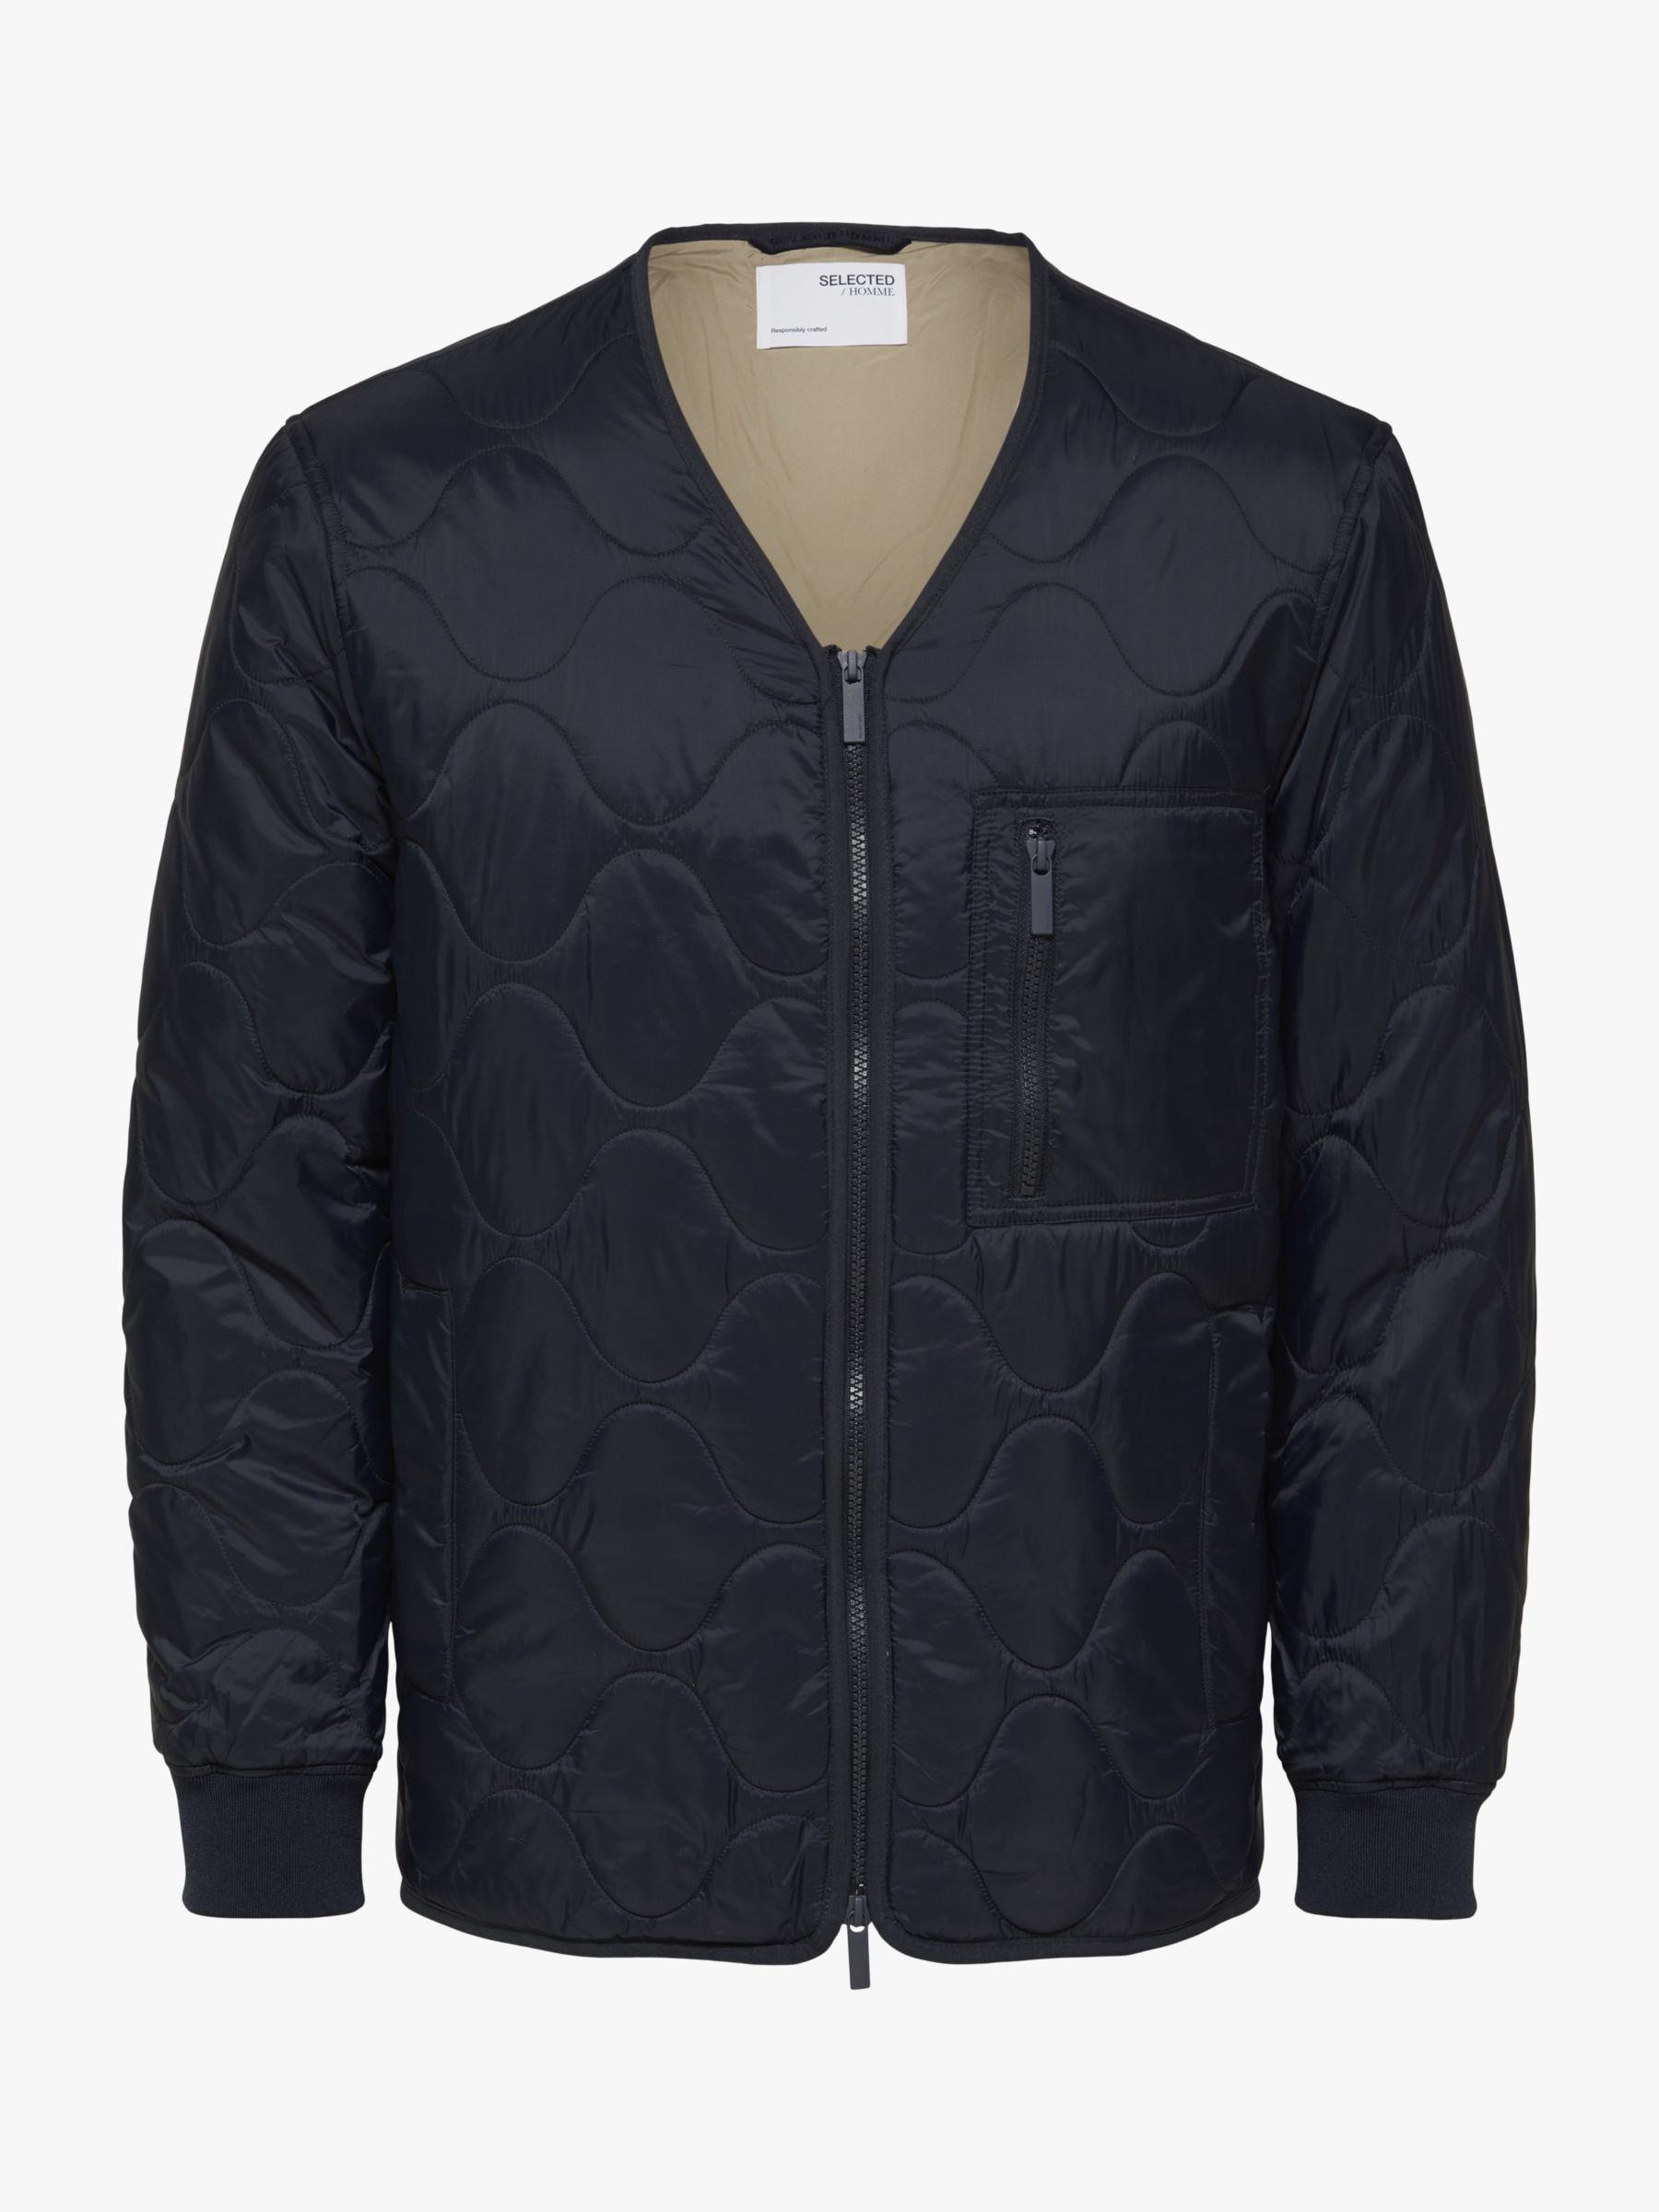 SELECTED HOMME SLHHANZO Quilted Jacket, Sky Captain, S